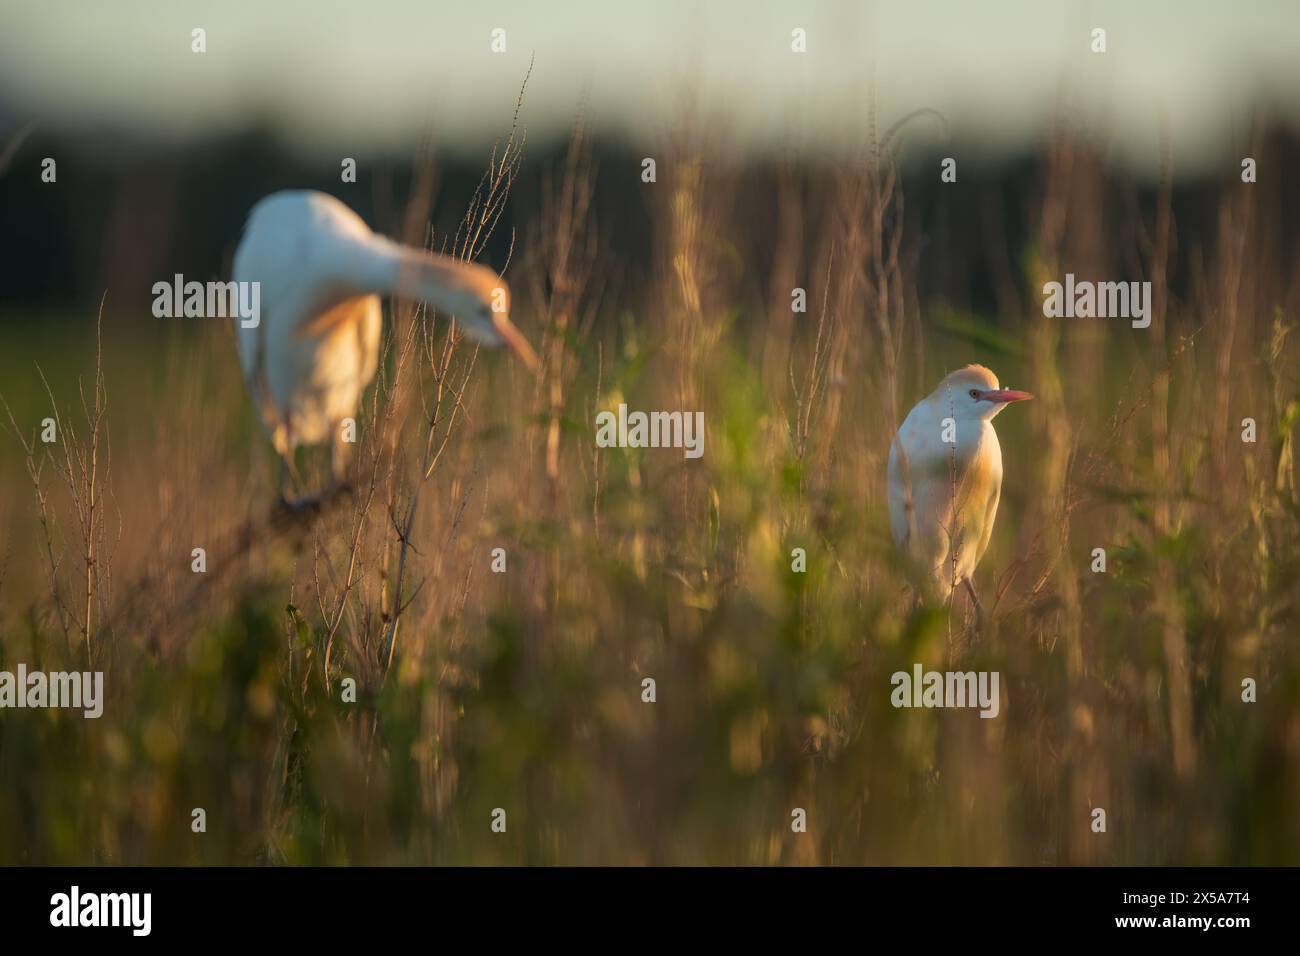 Two Cattle Egrets bask in the warm glow of the golden hour, amidst a natural grassy habitat, creating a peaceful scene Stock Photo